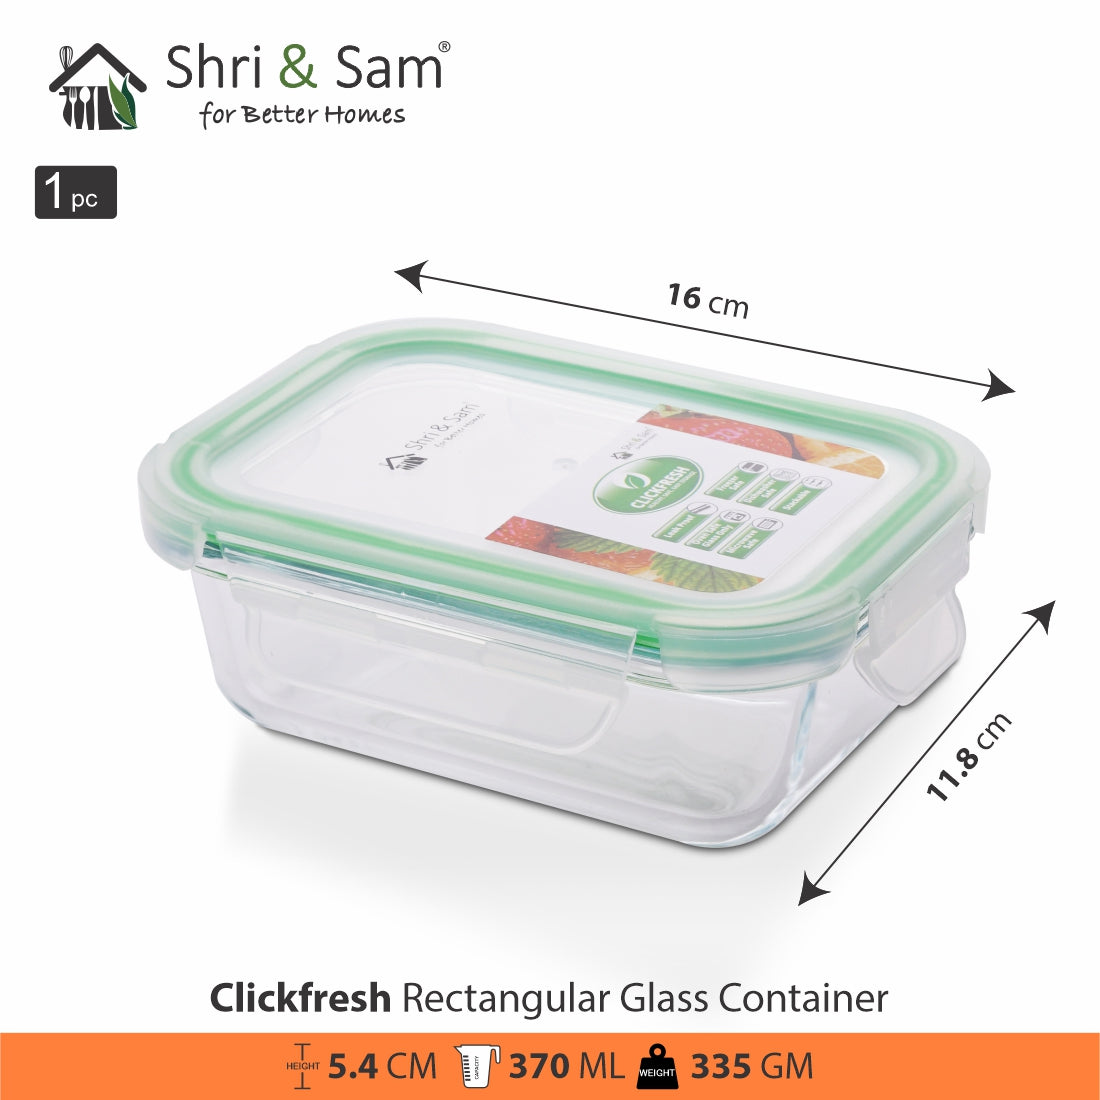 Glass 370ml Food Storage & Bakeware Container with Airtight Lid Rectangular Clickfresh